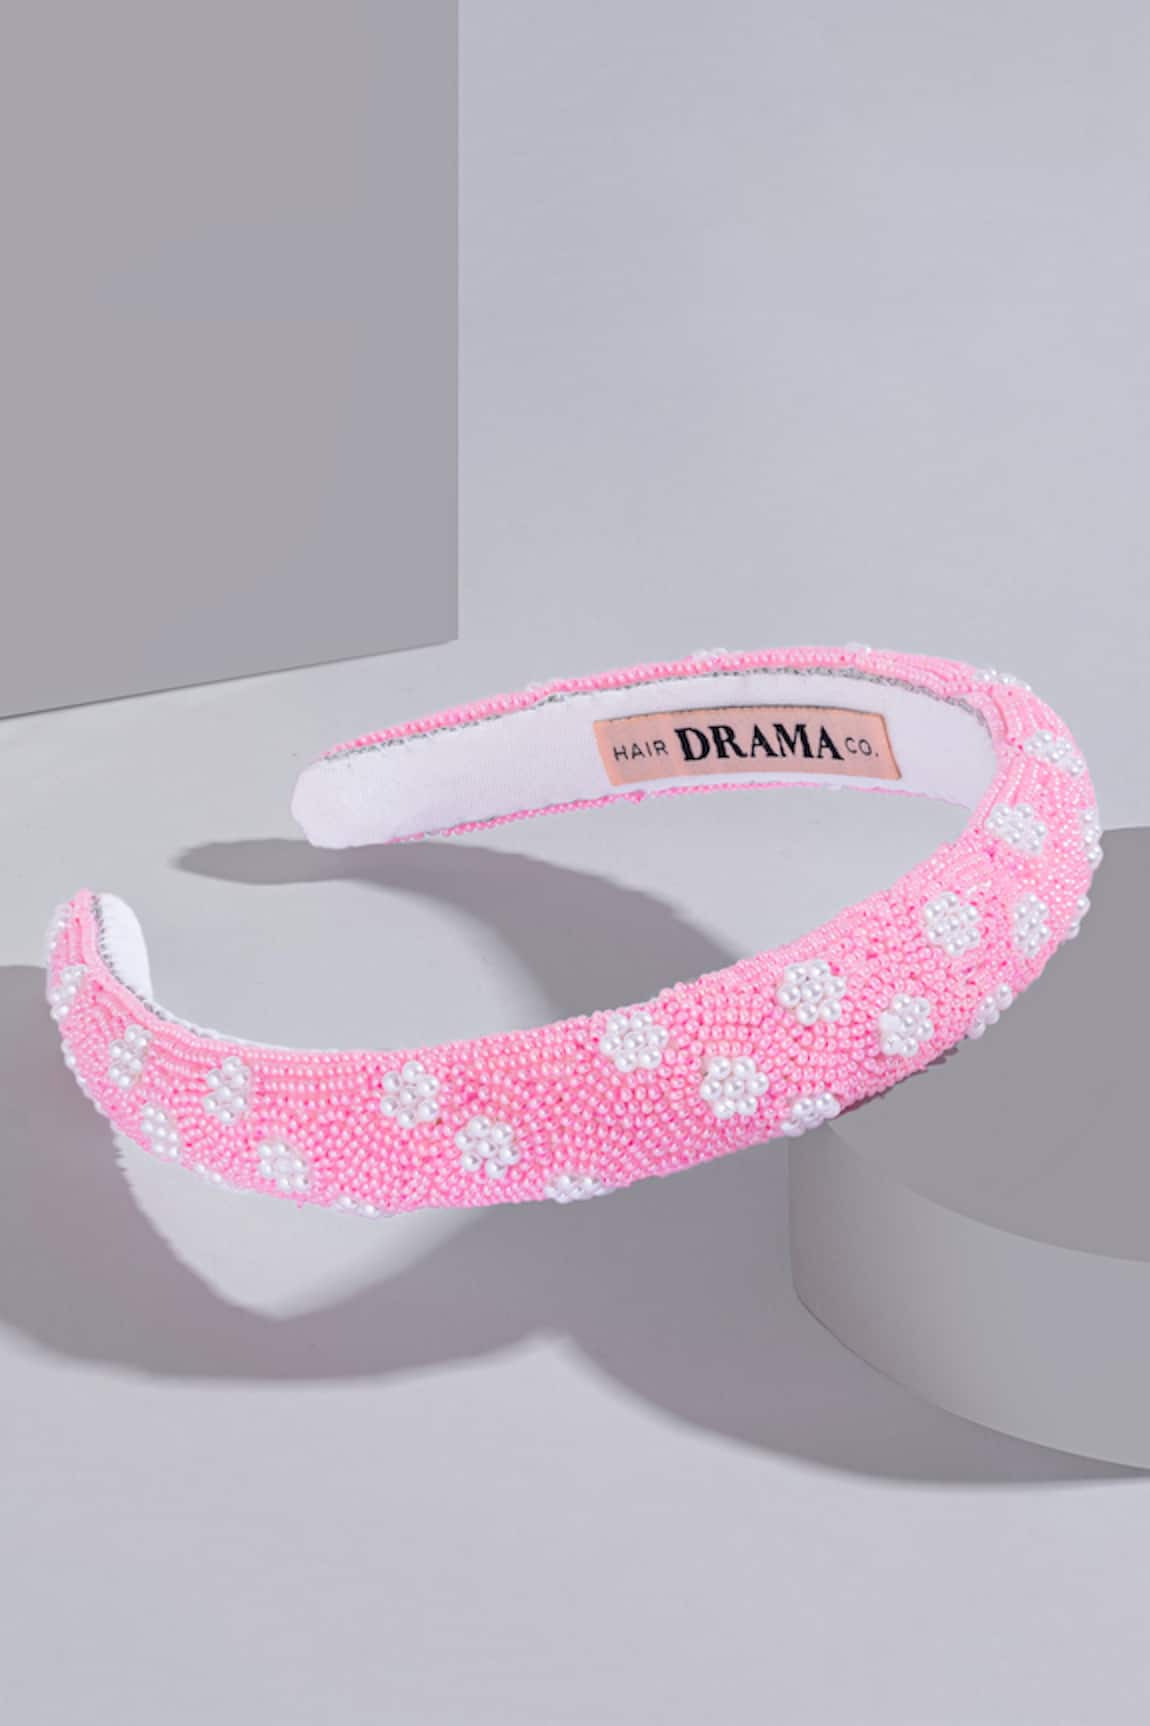 Hair Drama Co. Floral Pearl Embellished Puff Hair Band